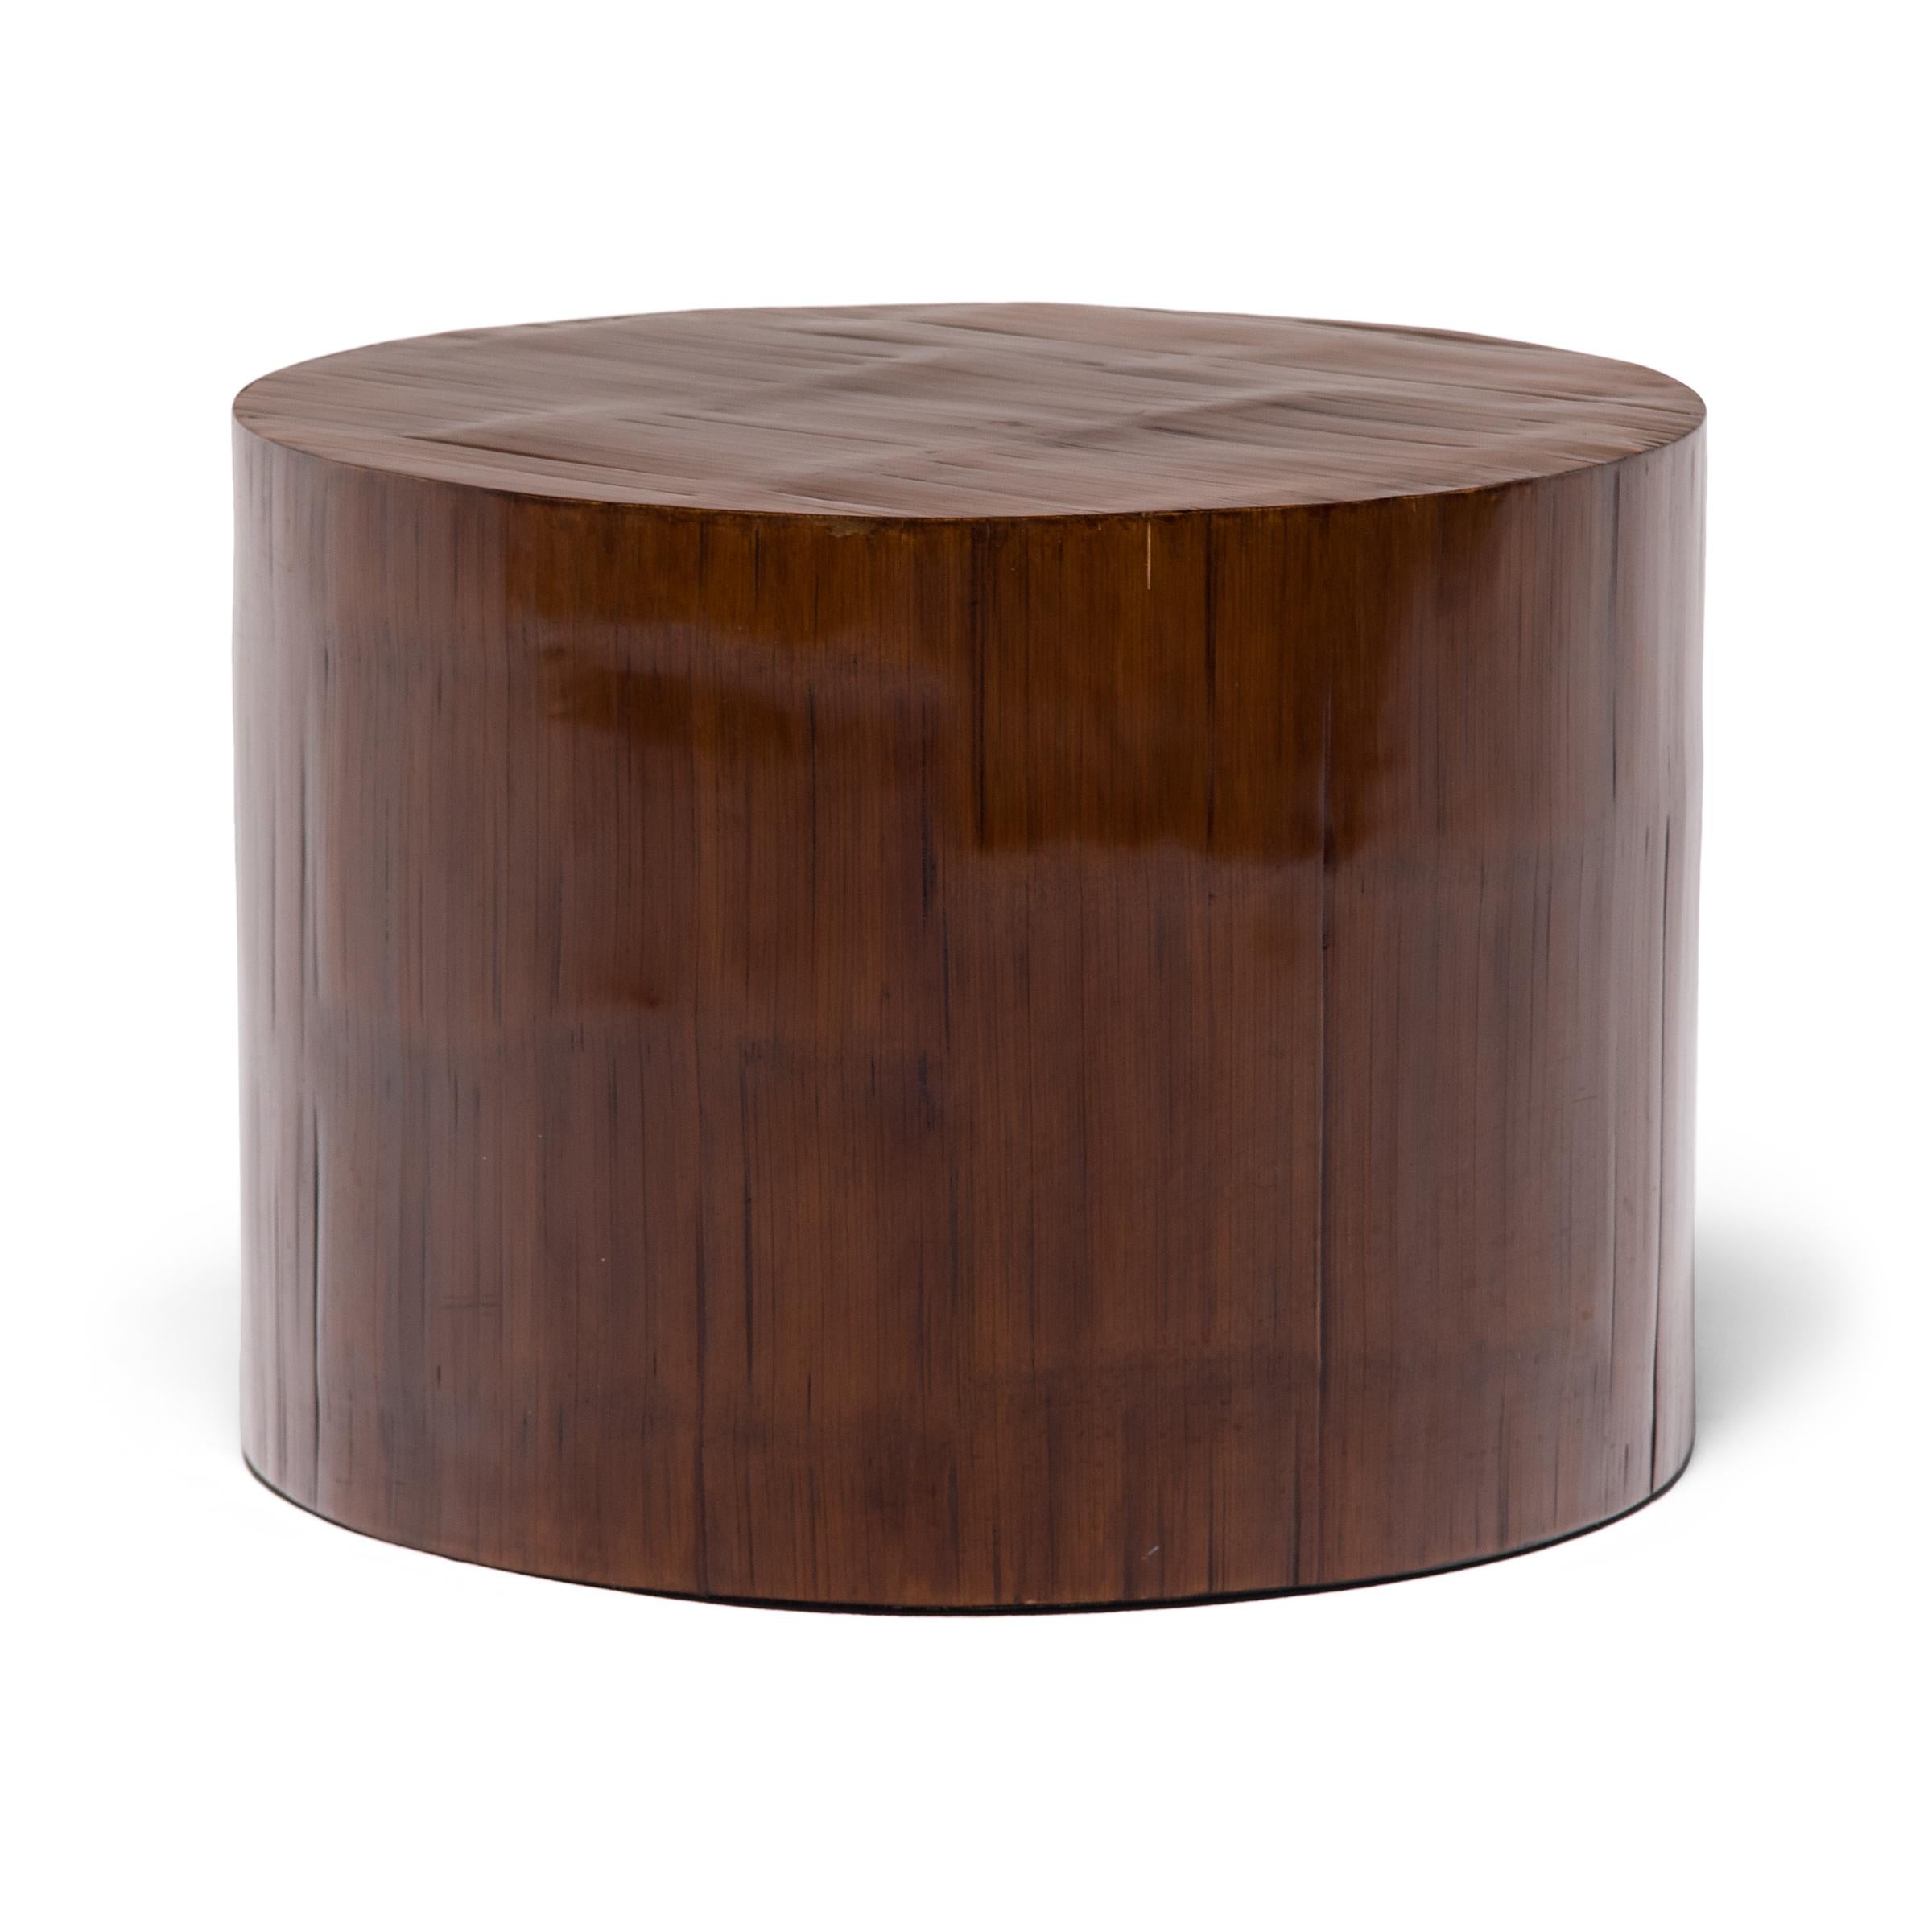 This round pedestal table from Guangzhou, China has an effortless design that works itself seamlessly into any interior. Crushed bamboo brings subtle texture to its minimal form and a finish of chestnut brown lacquer brings out its sculptural